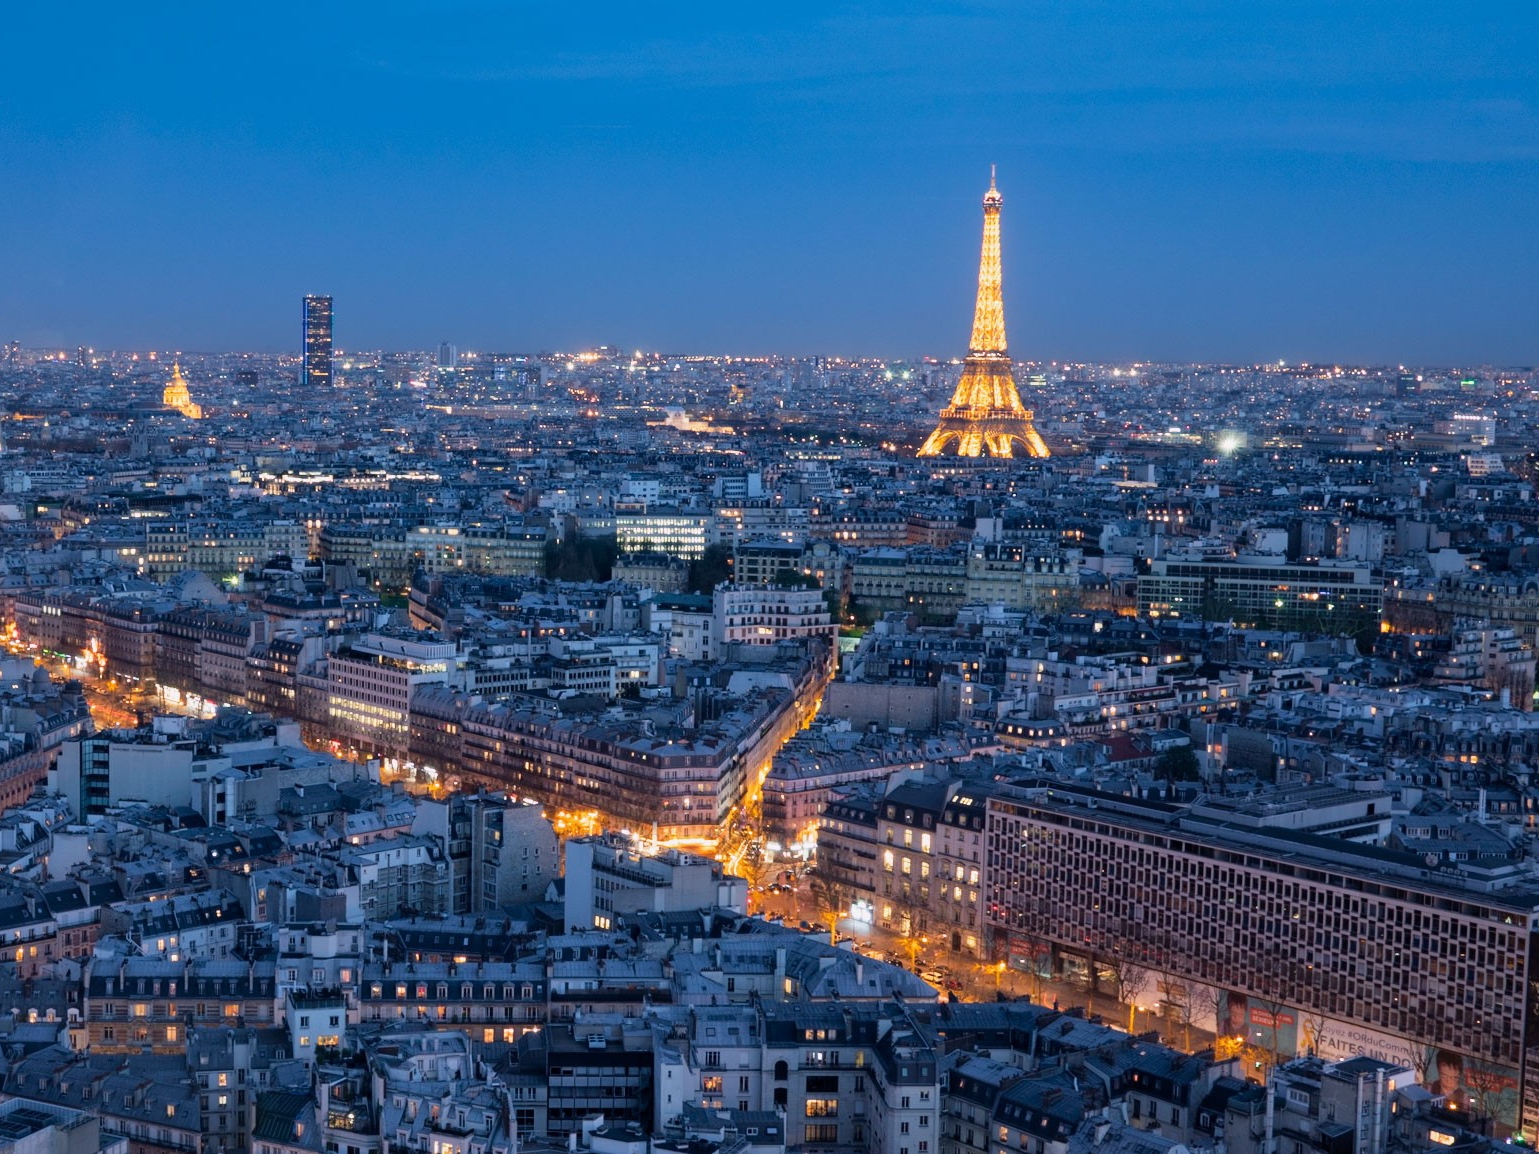 Panoramic City and Eiffel Tower Views from the Windo rooftop SkyBar in Paris